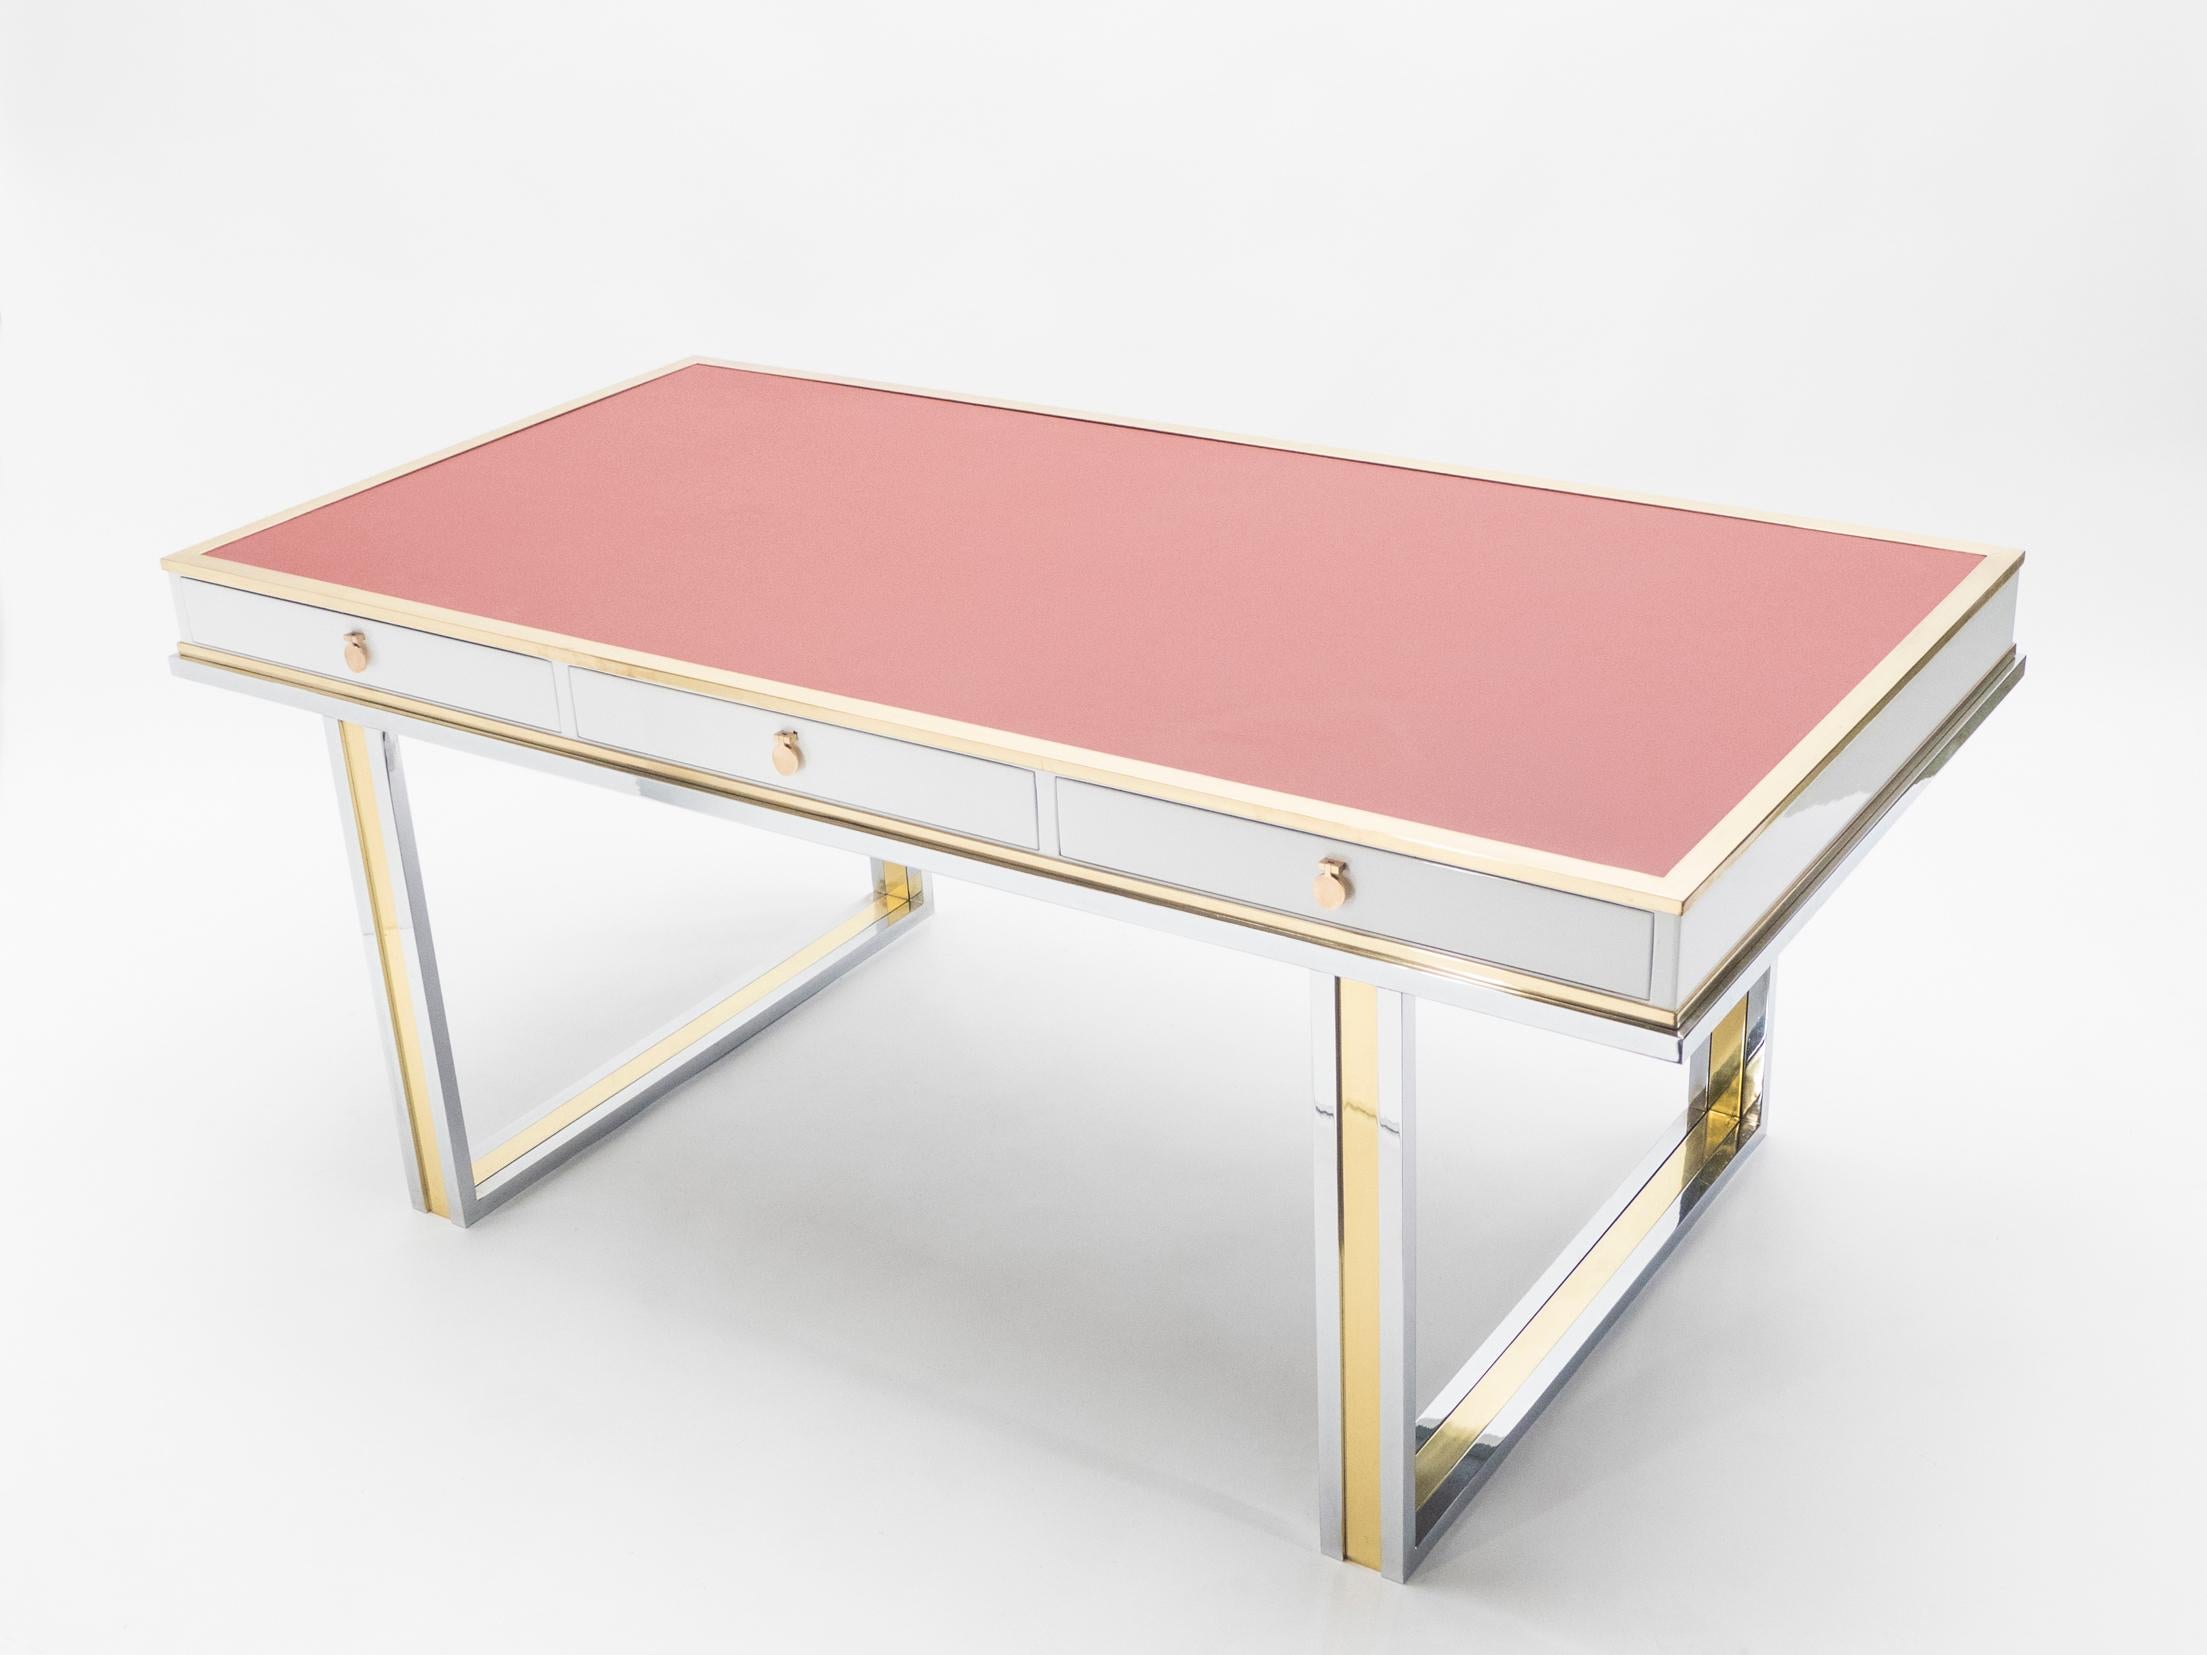 Unique French Desk White Lacquer Brass Red Leather by Atelier La Boetie, 1974 (Messing)